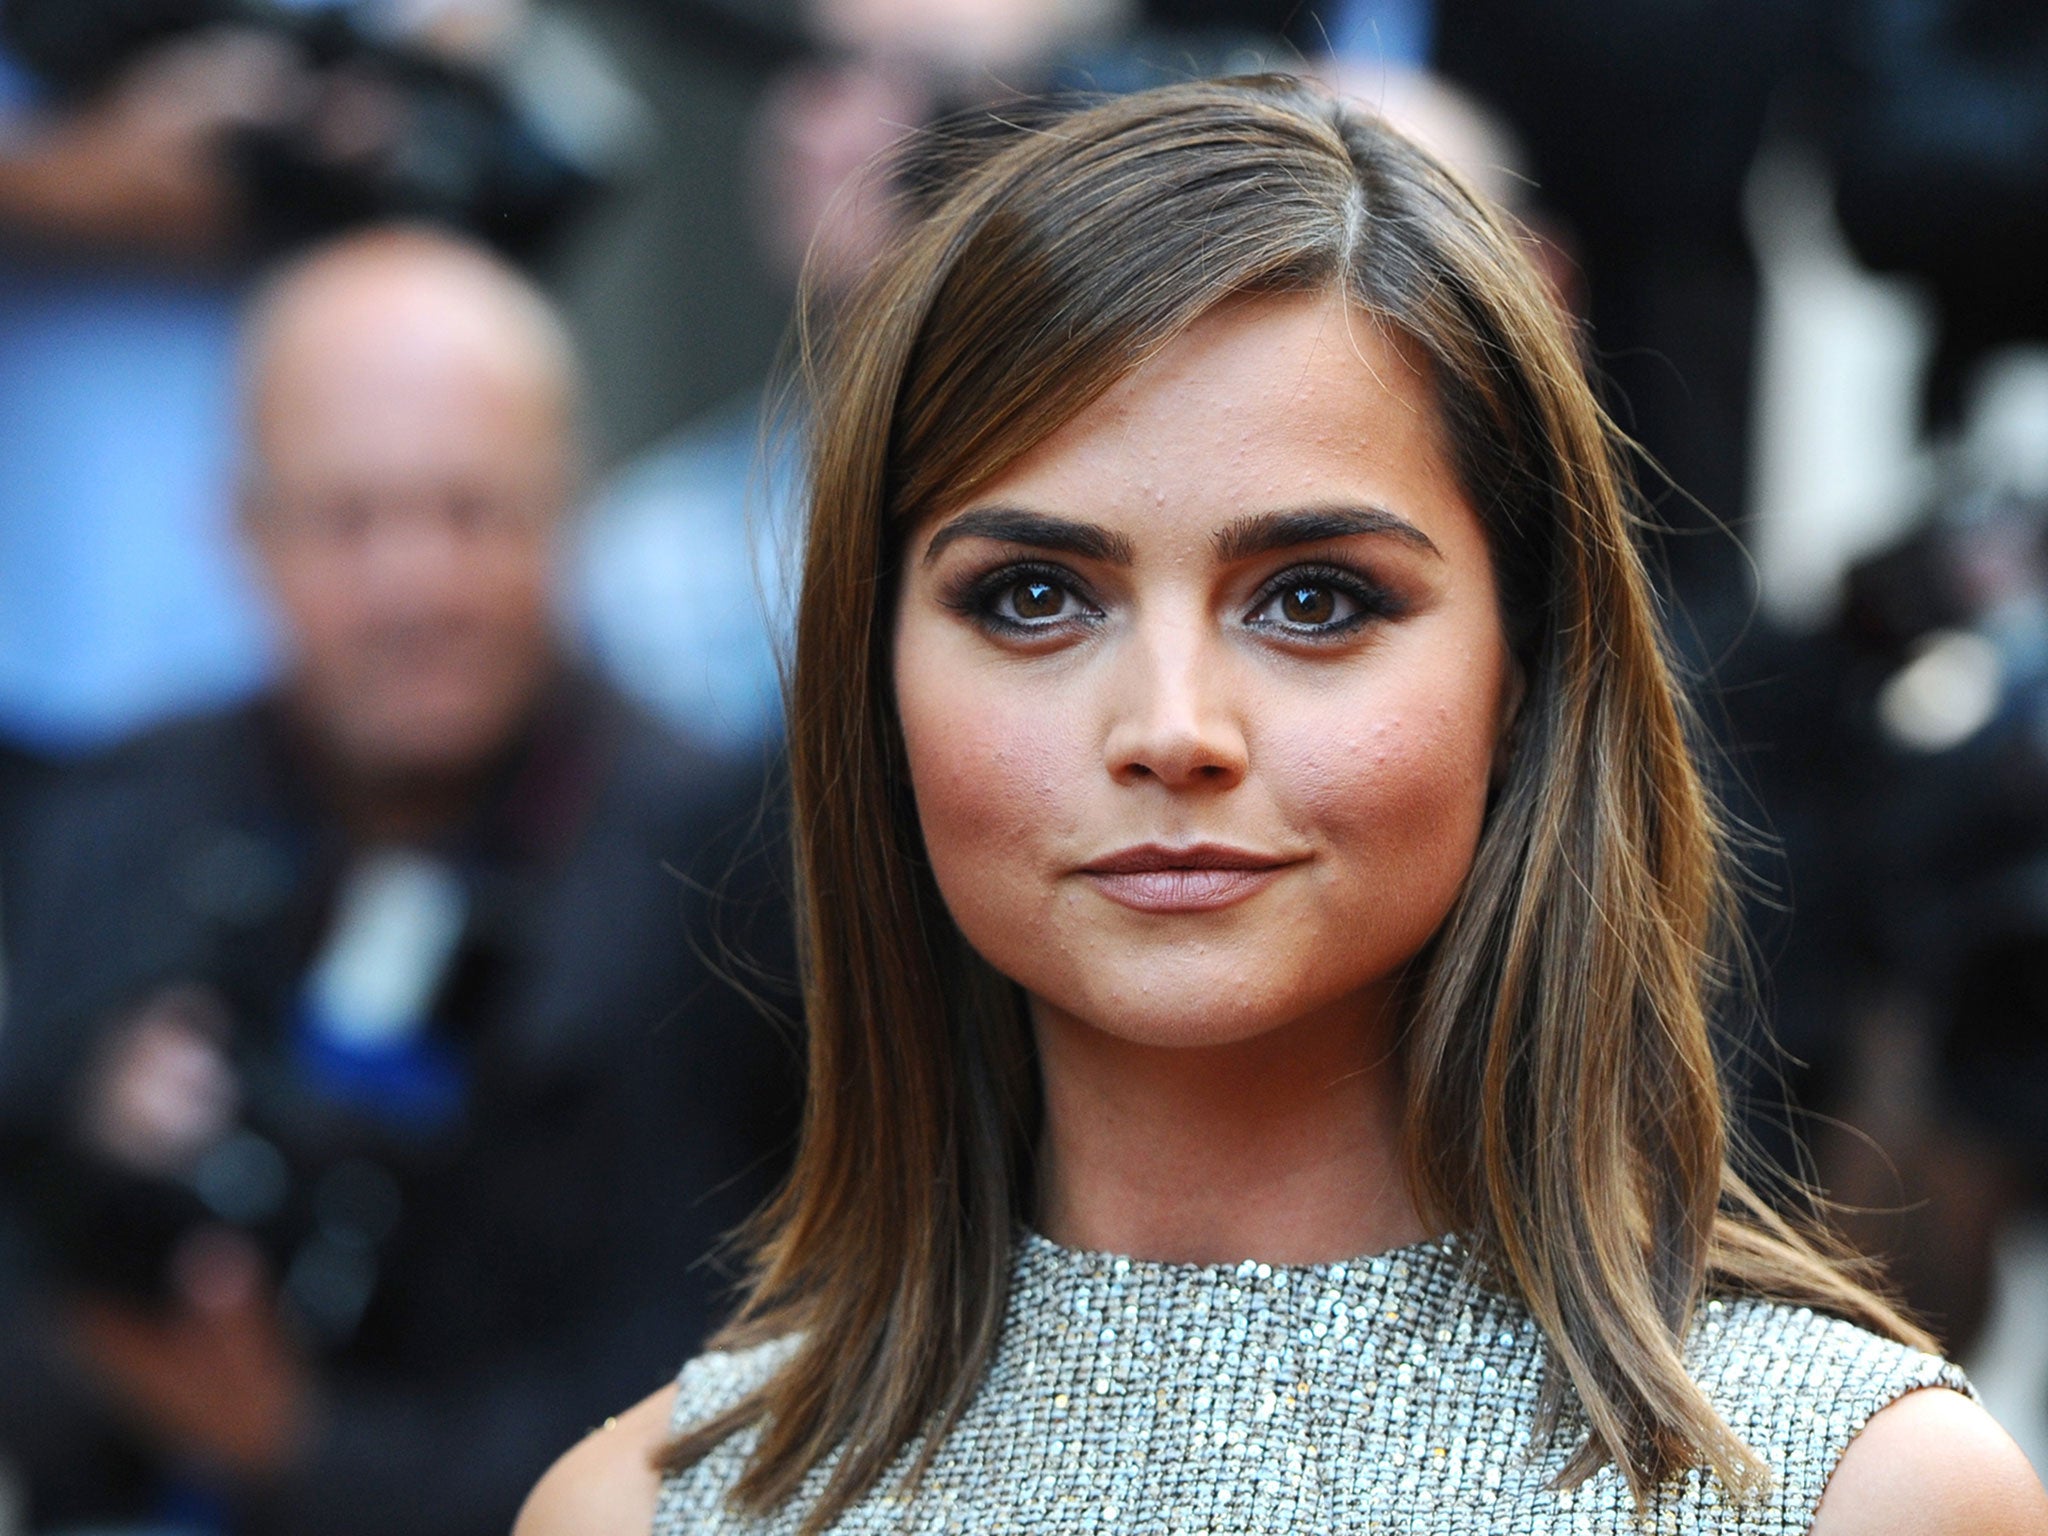 &#13;
Jenna Coleman starred as the Time Lord's companion Clara in Doctor Who &#13;